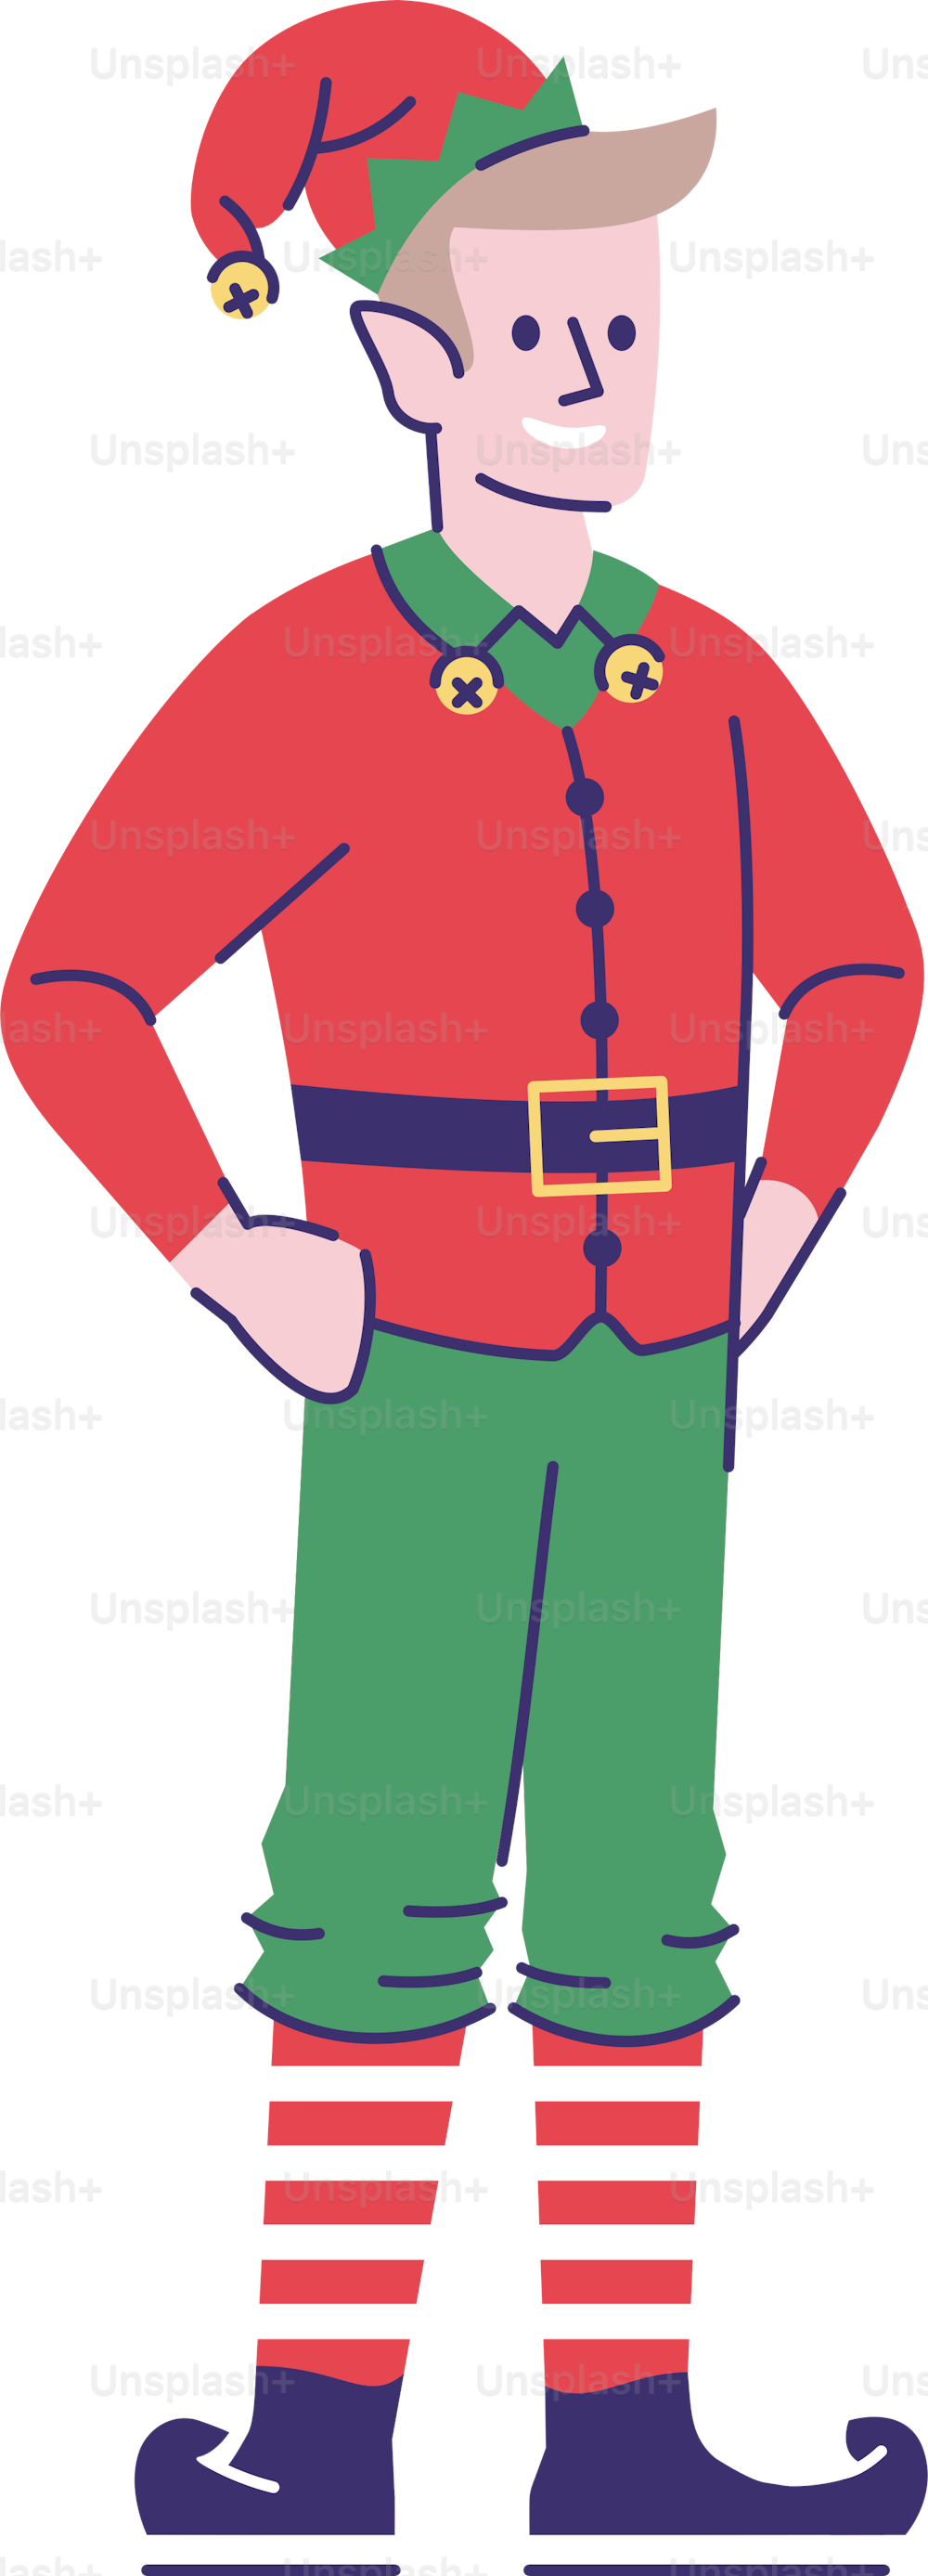 Man wearing elf costume flat vector illustration. Leprechaun cartoon character with outline elements isolated on white background. Festive X-mas oufit. Santa Claus hepler Christmas costume